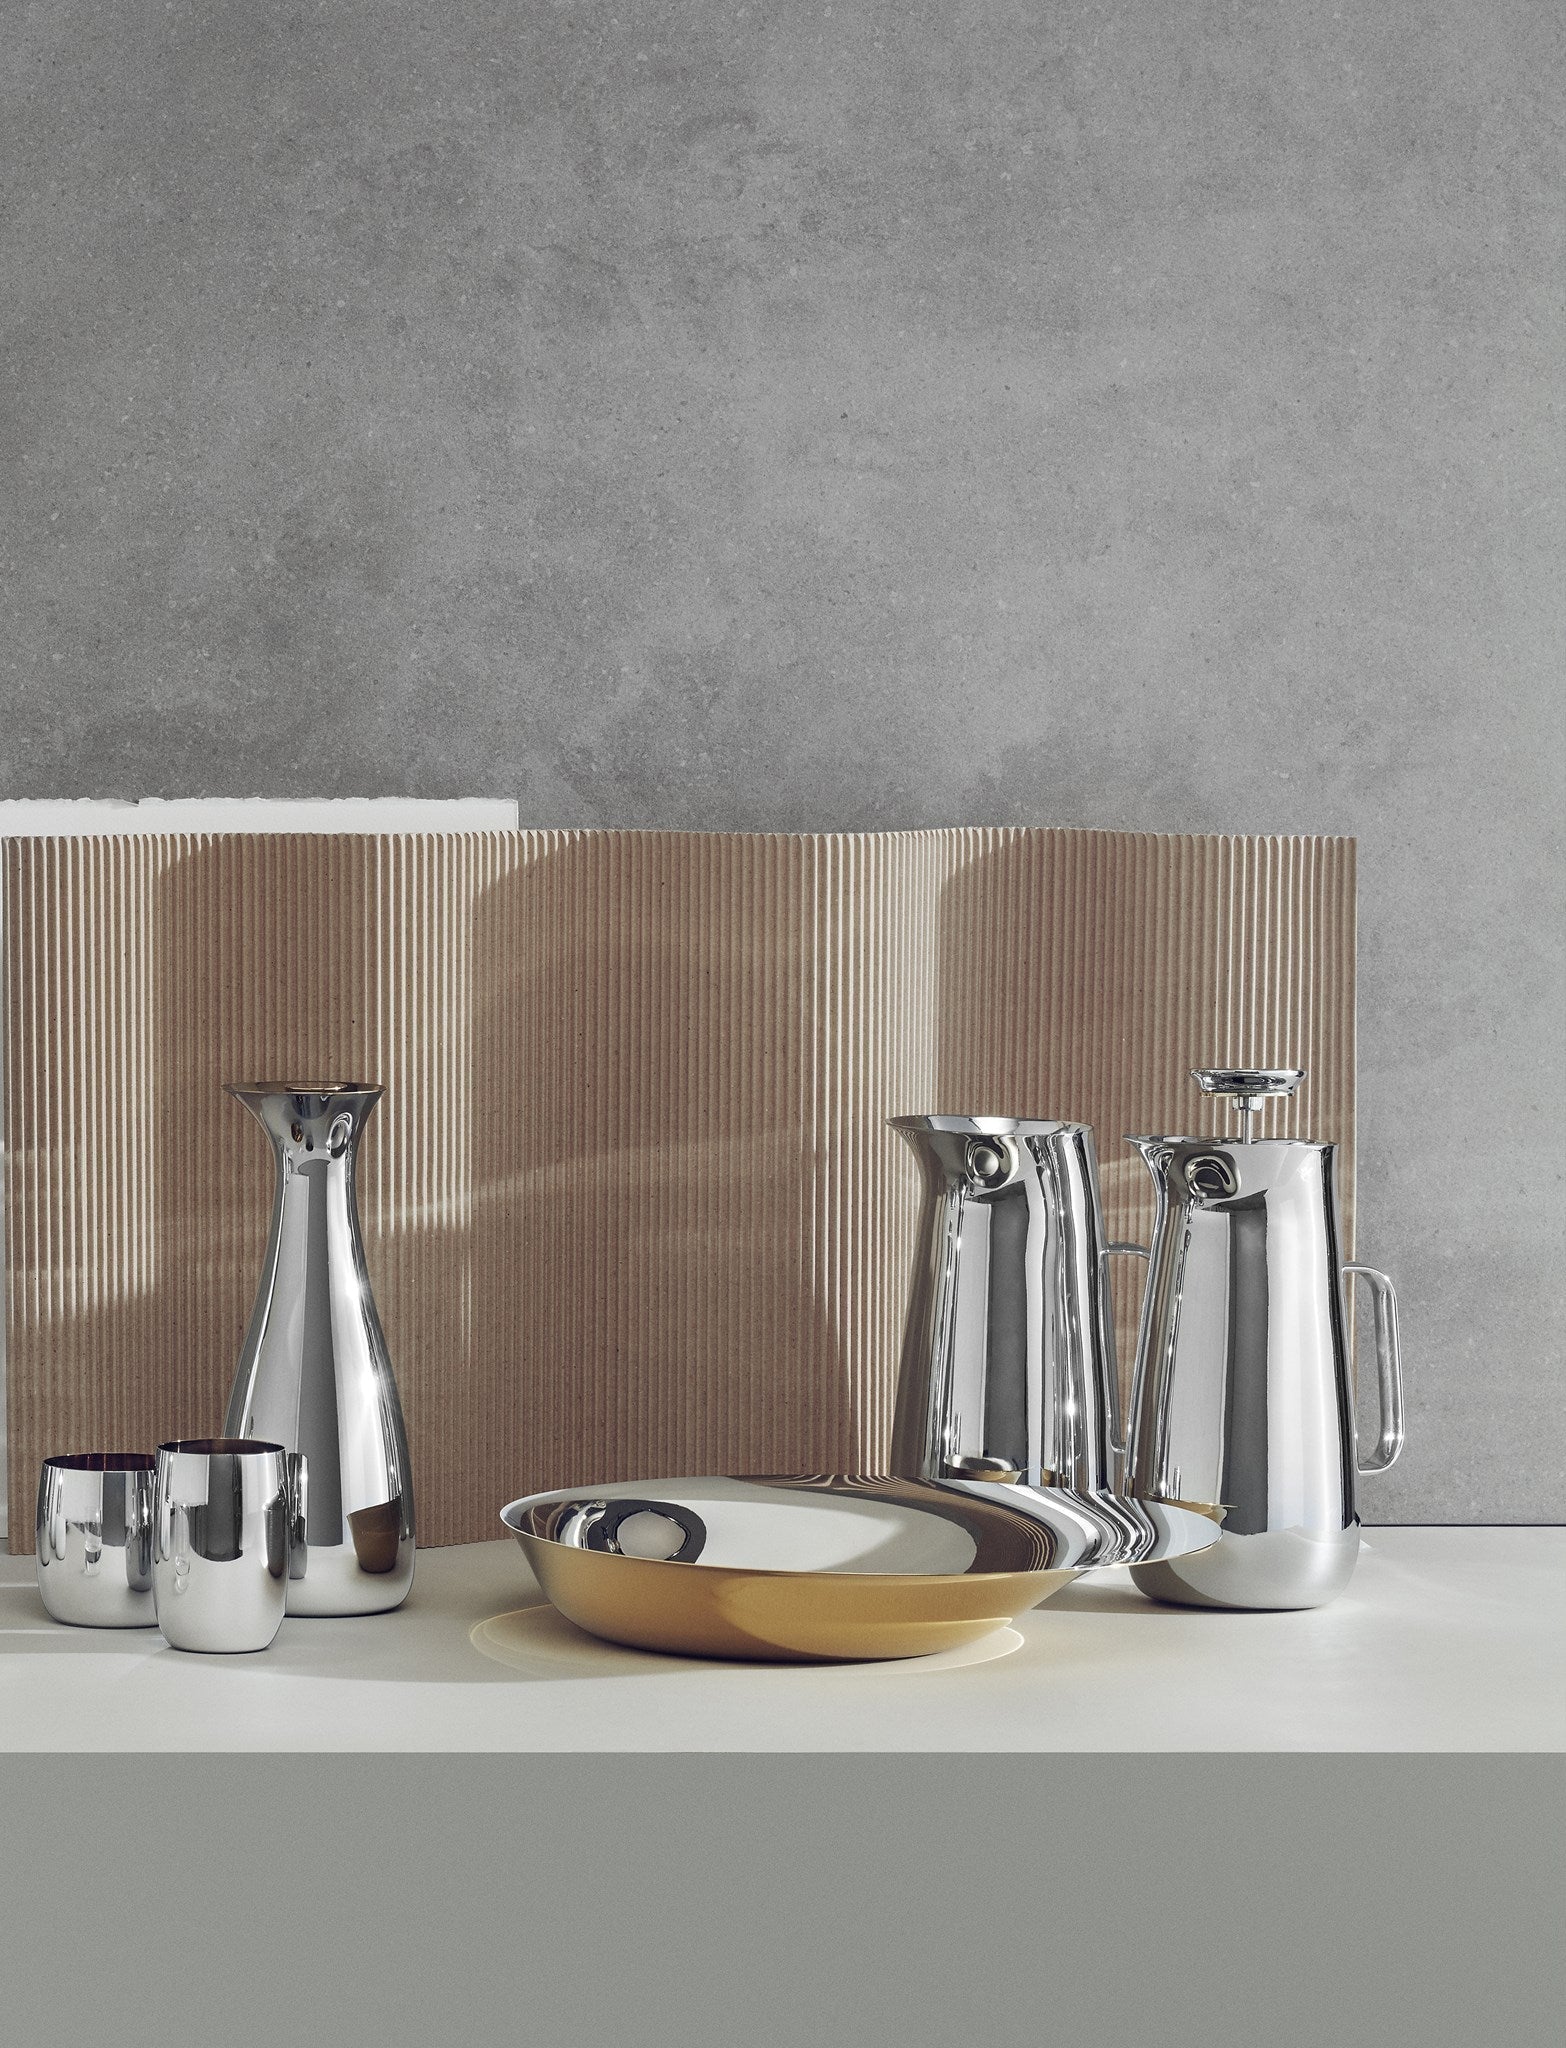 Stelton Norman Foster Thermo Hande 1 l